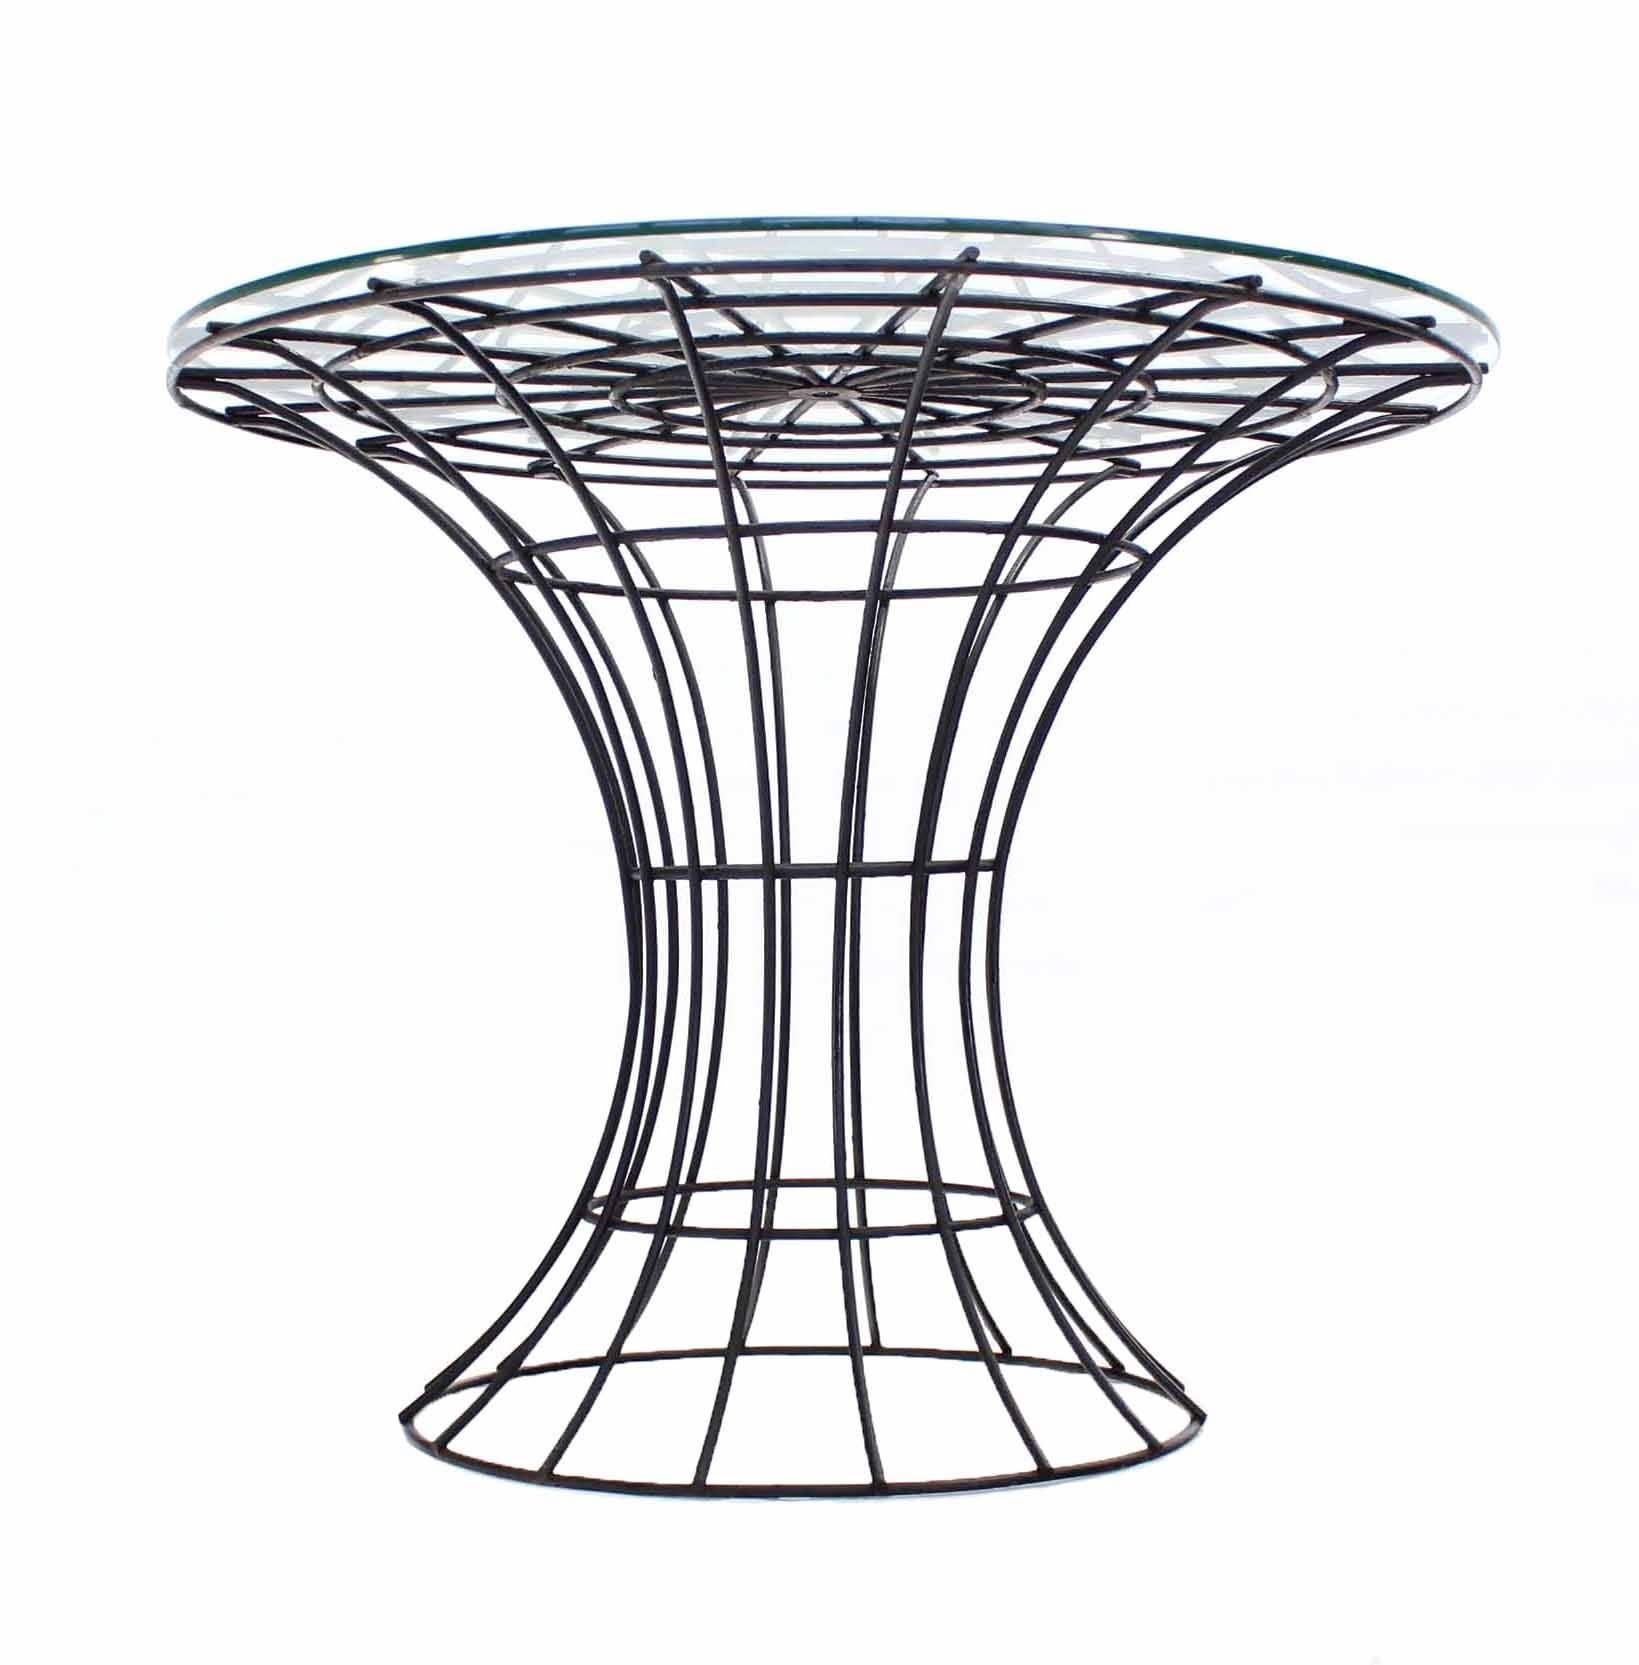 Mid-Century Modern John Risley Four Pieces Welded Wire Outdoor Dining Dinette Set Round Table